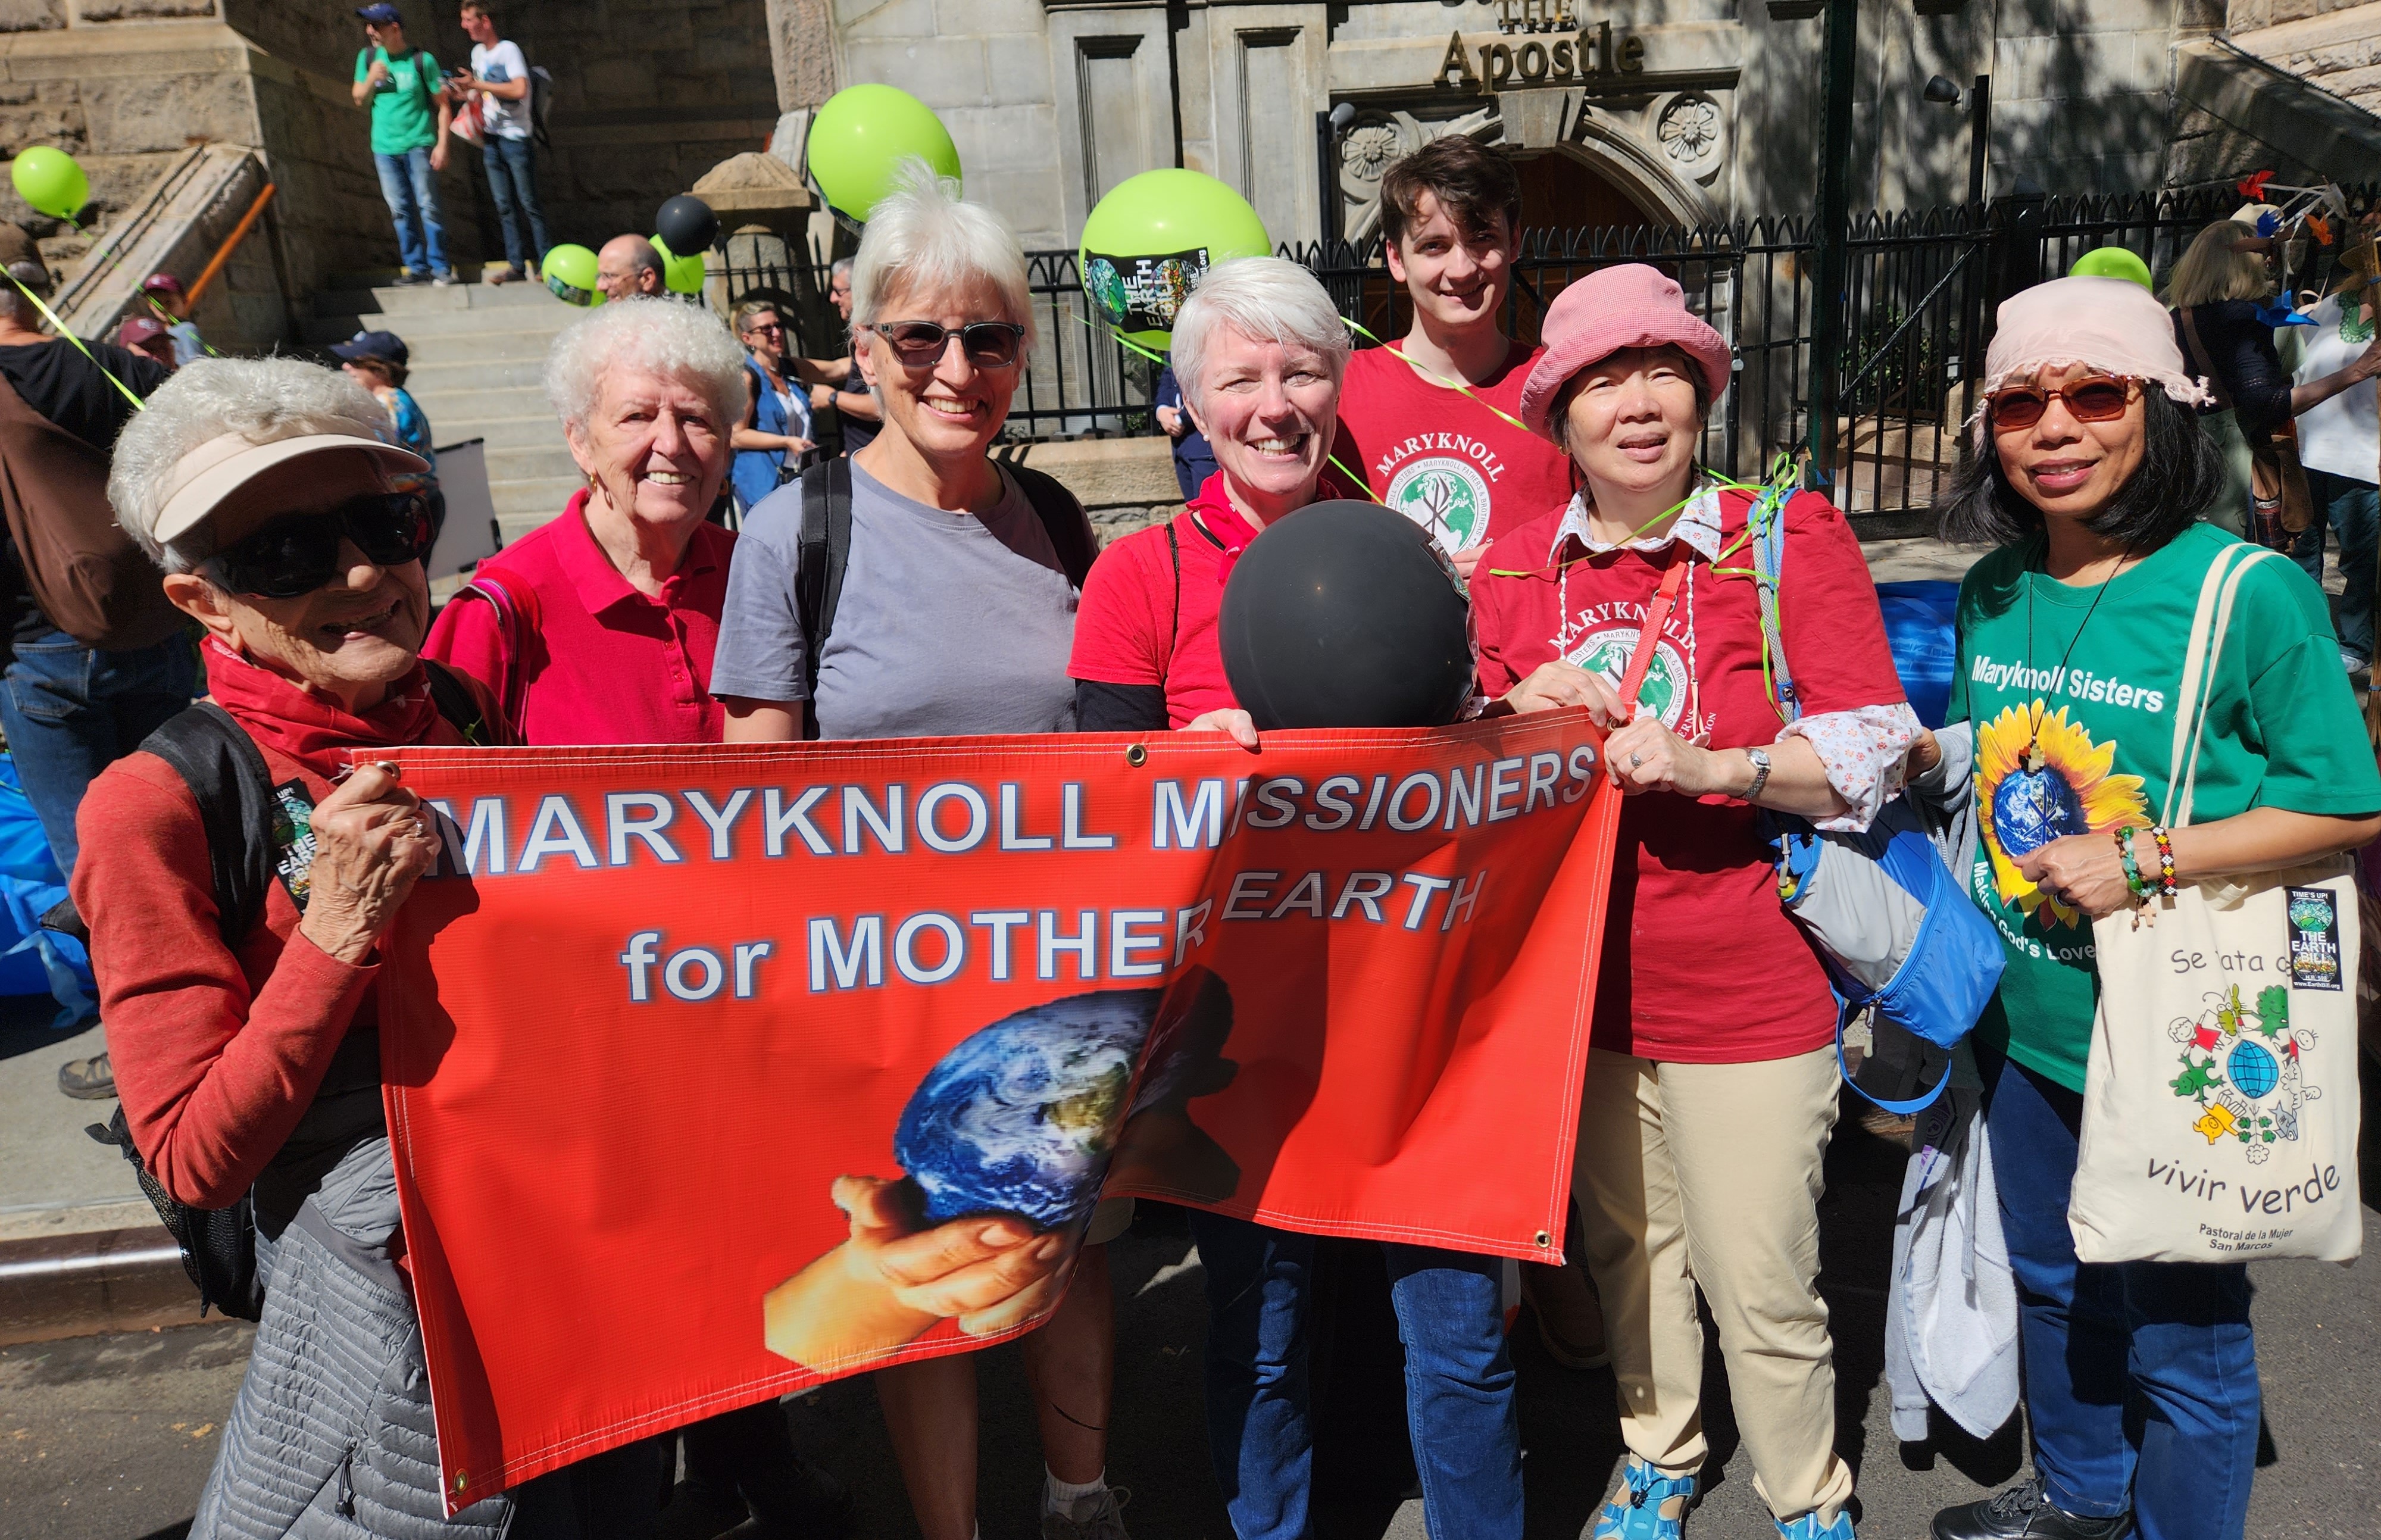 A group of people with banner for Maryknoll Missioners